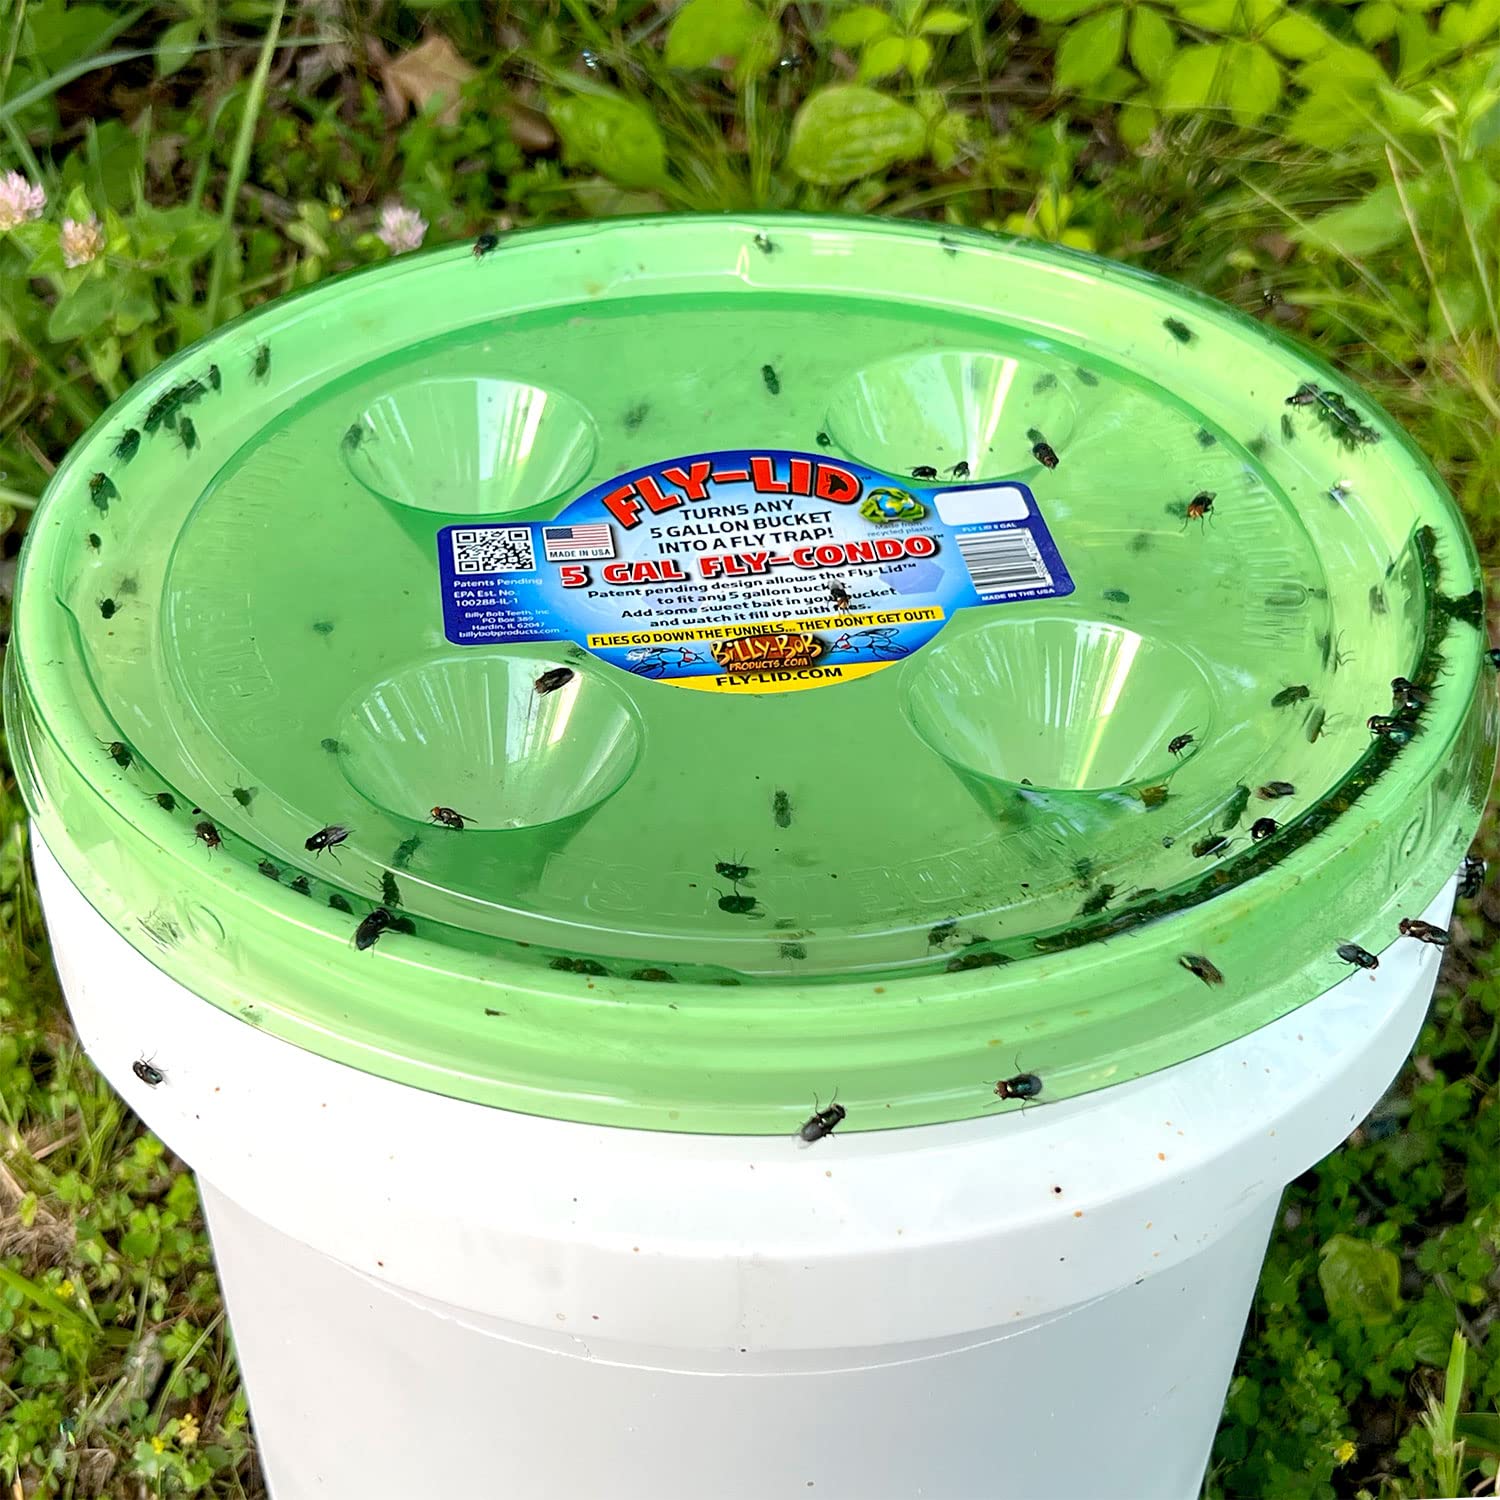 Billy-Bob Fly Lid Combo- Indoor Outdoor Eco Friendly Fly Control Pack - Includes 6 Fly-Lids (3-2 Packs) for Disposable Cups and 2 Fly-Lids for 5 Gallon Buckets